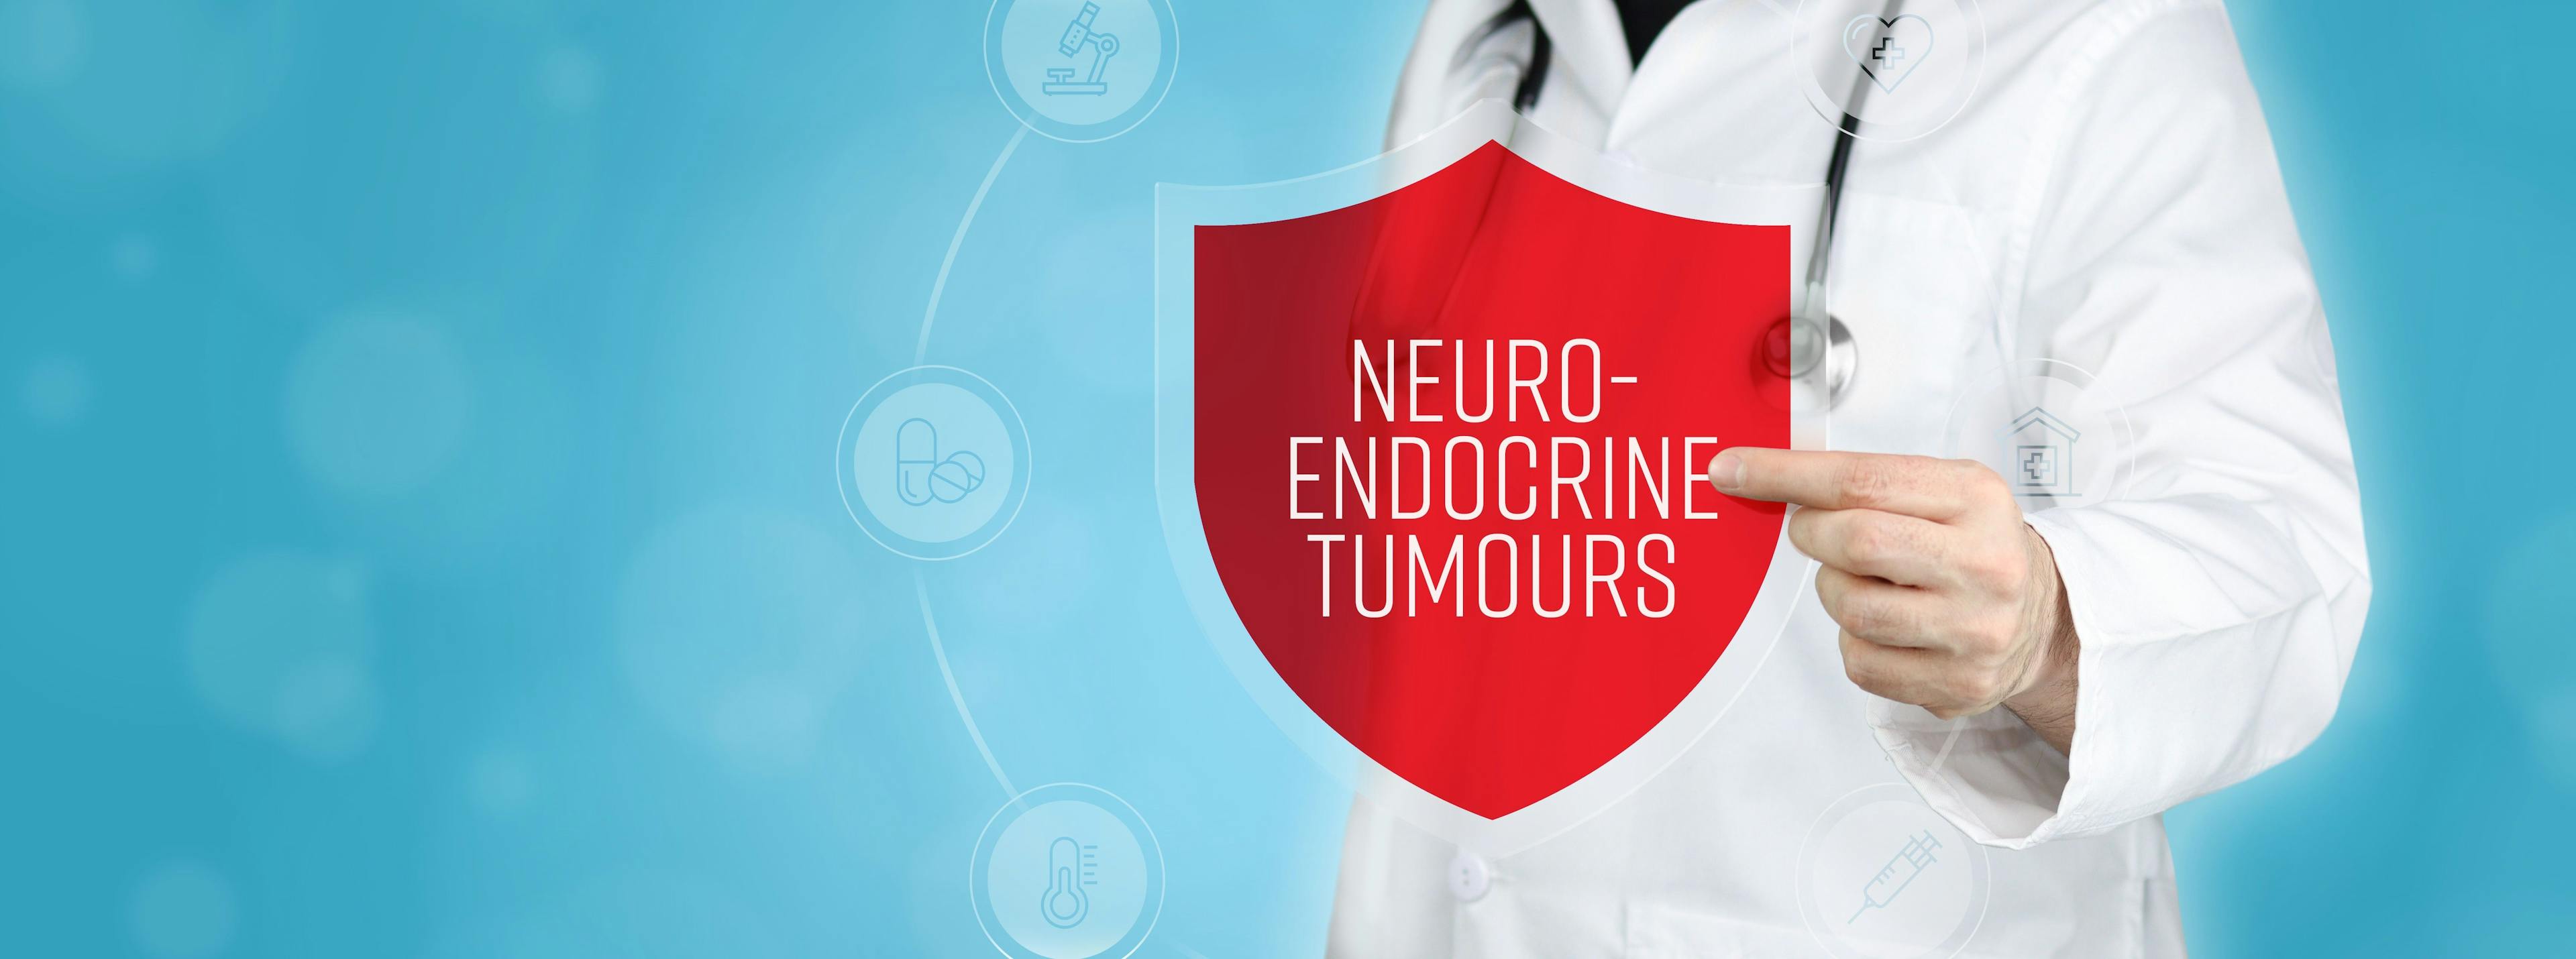 Neuroendocrine tumours. Doctor holding red shield protection symbol surrounded by icons in a circle. Medical word | Image credit: © MQ-Illustrations - © stock.adobe.com 